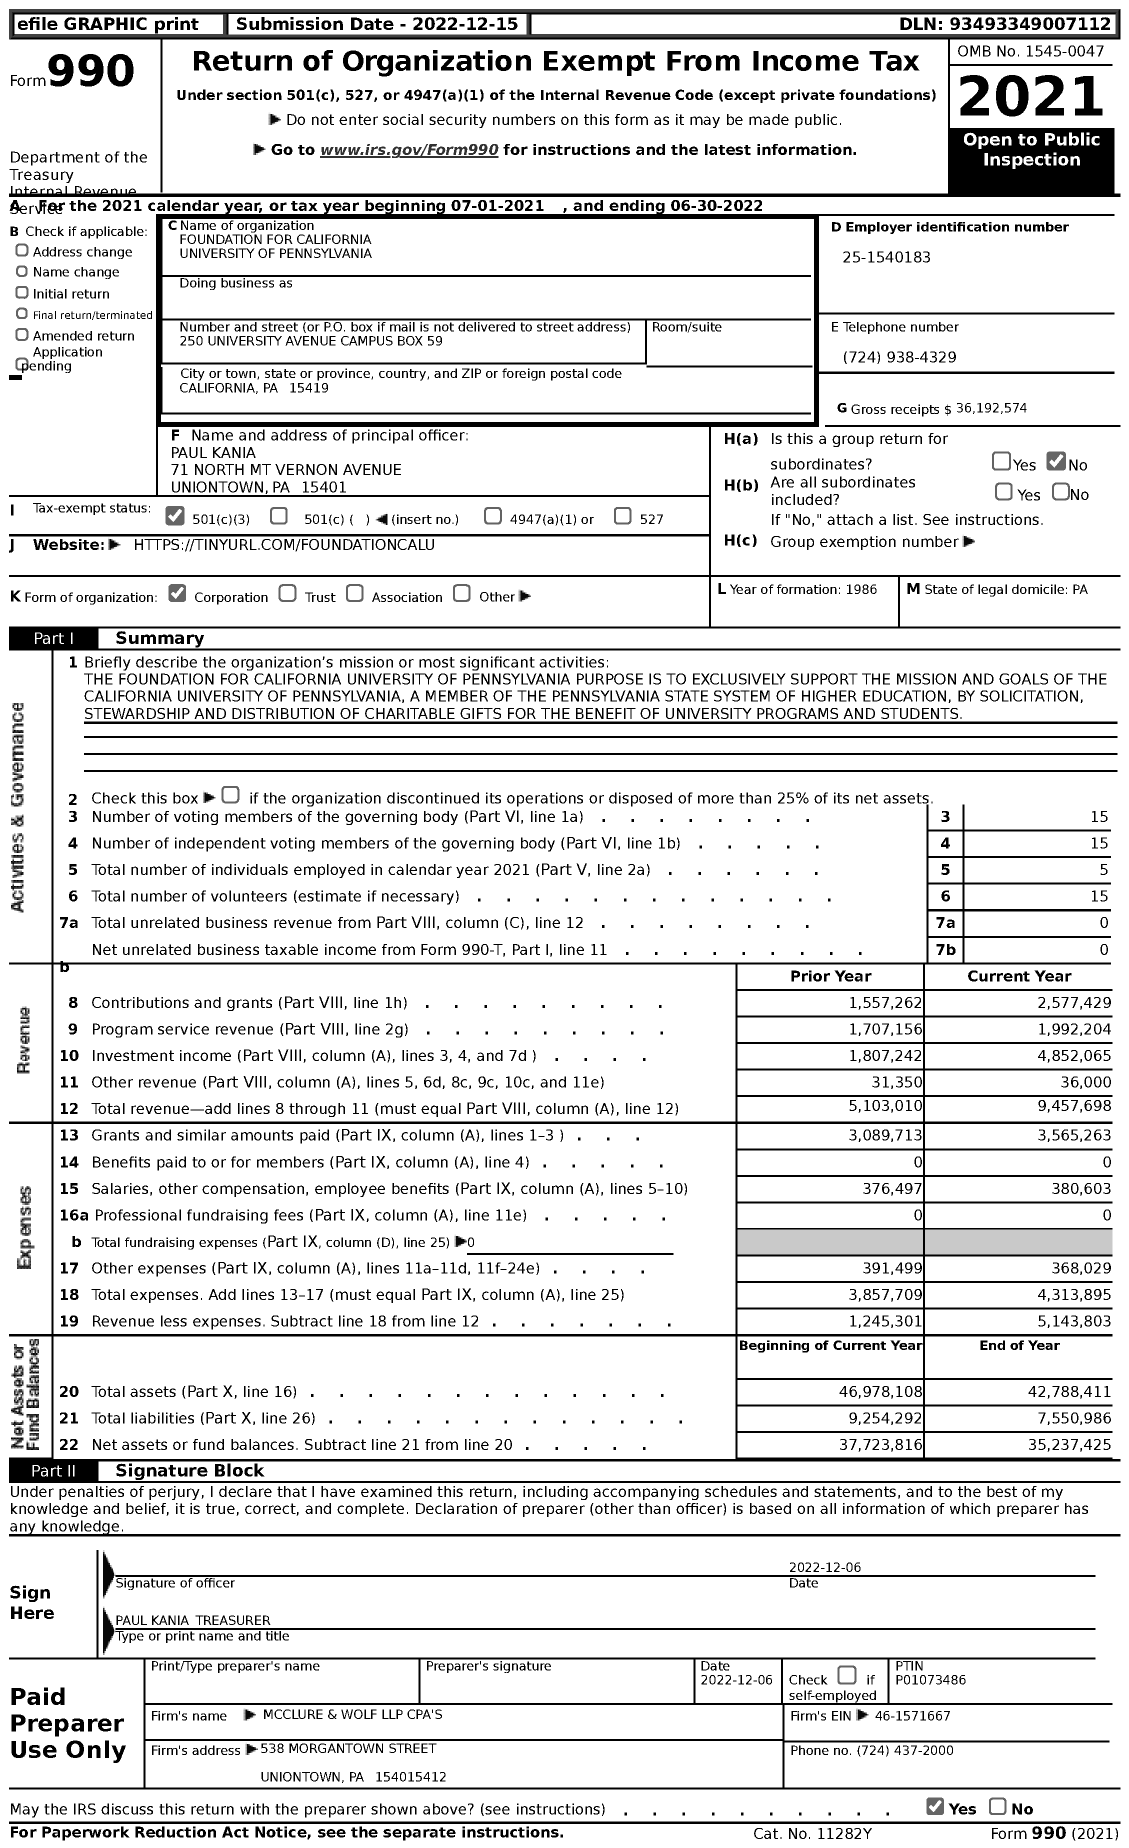 Image of first page of 2021 Form 990 for Foundation for California University of Pennsylvania